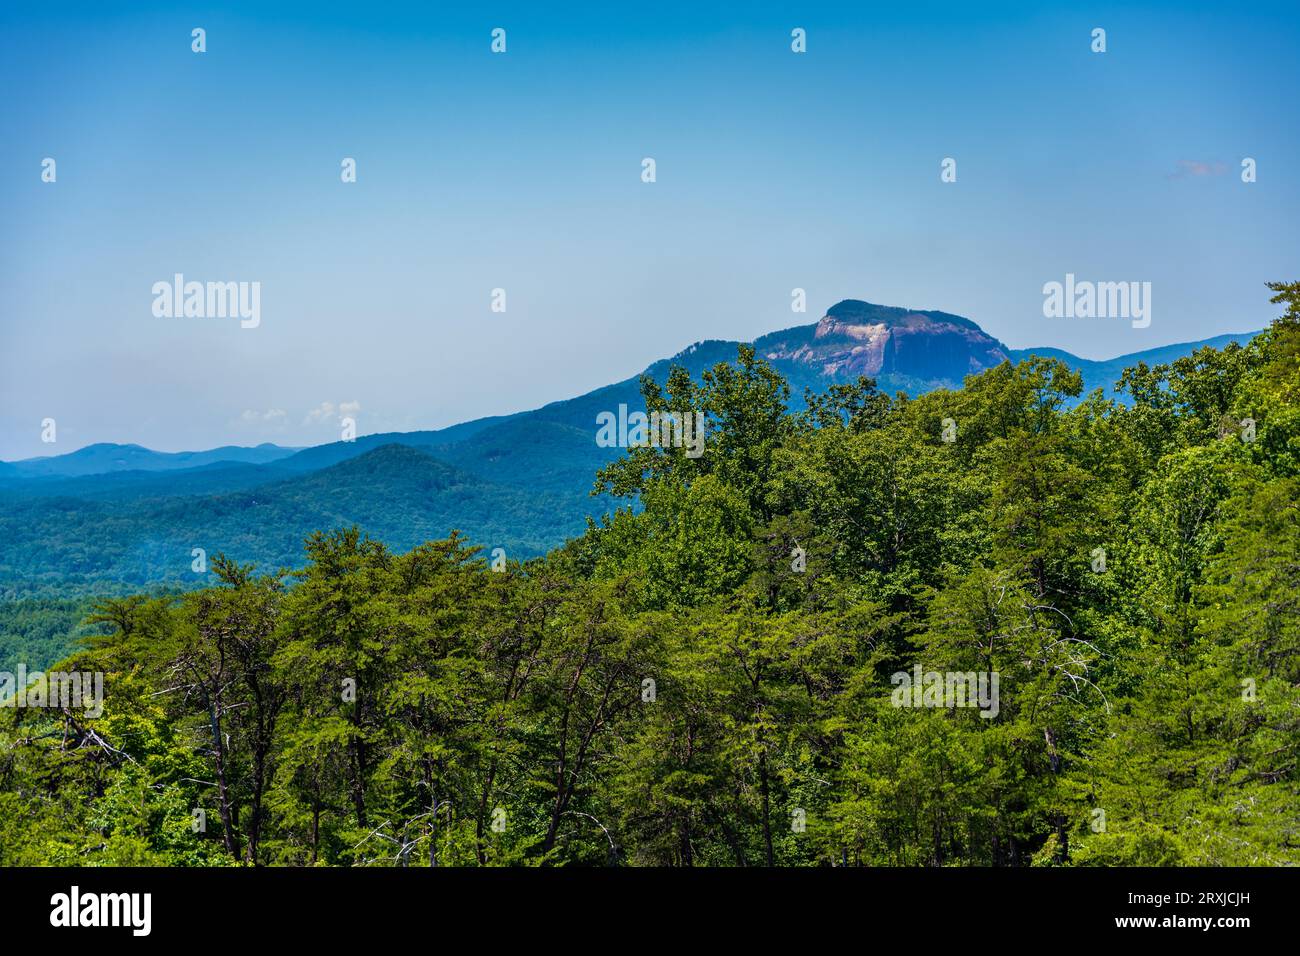 An overlooking view in Greenville, South Carolina Stock Photo